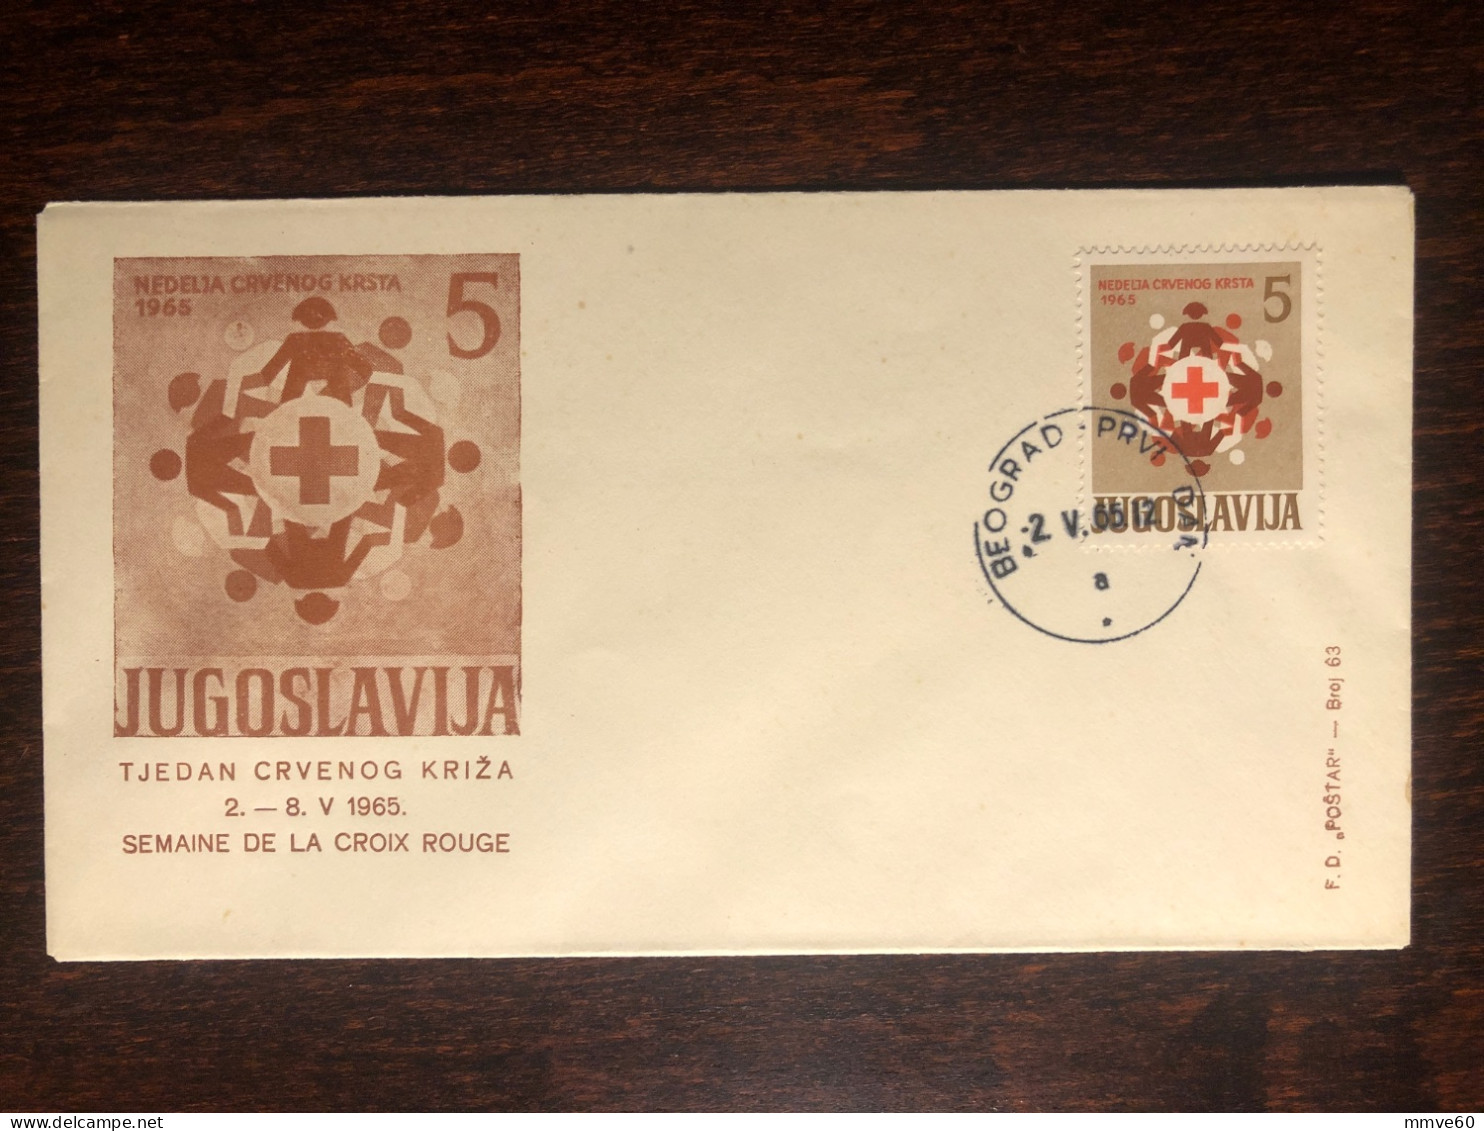 YUGOSLAVIA FDC COVER 1965 YEAR RED CROSS HEALTH MEDICINE STAMPS - FDC